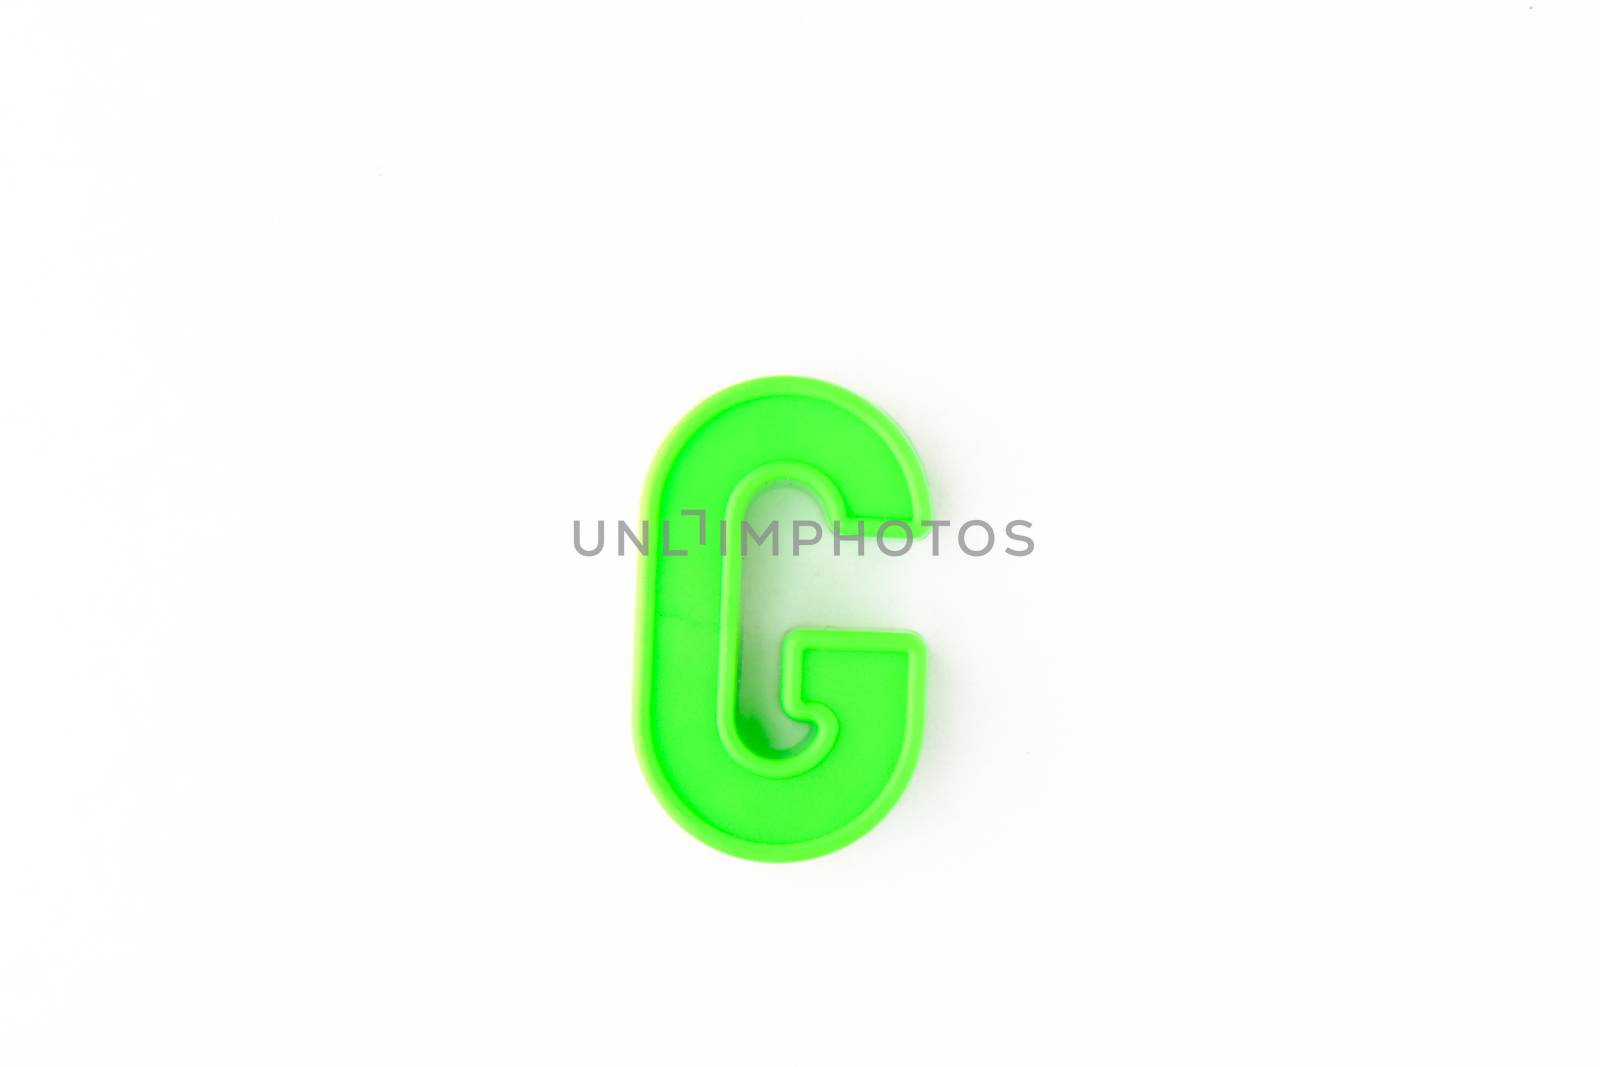 Isolated colorful letter over white background by mikelju